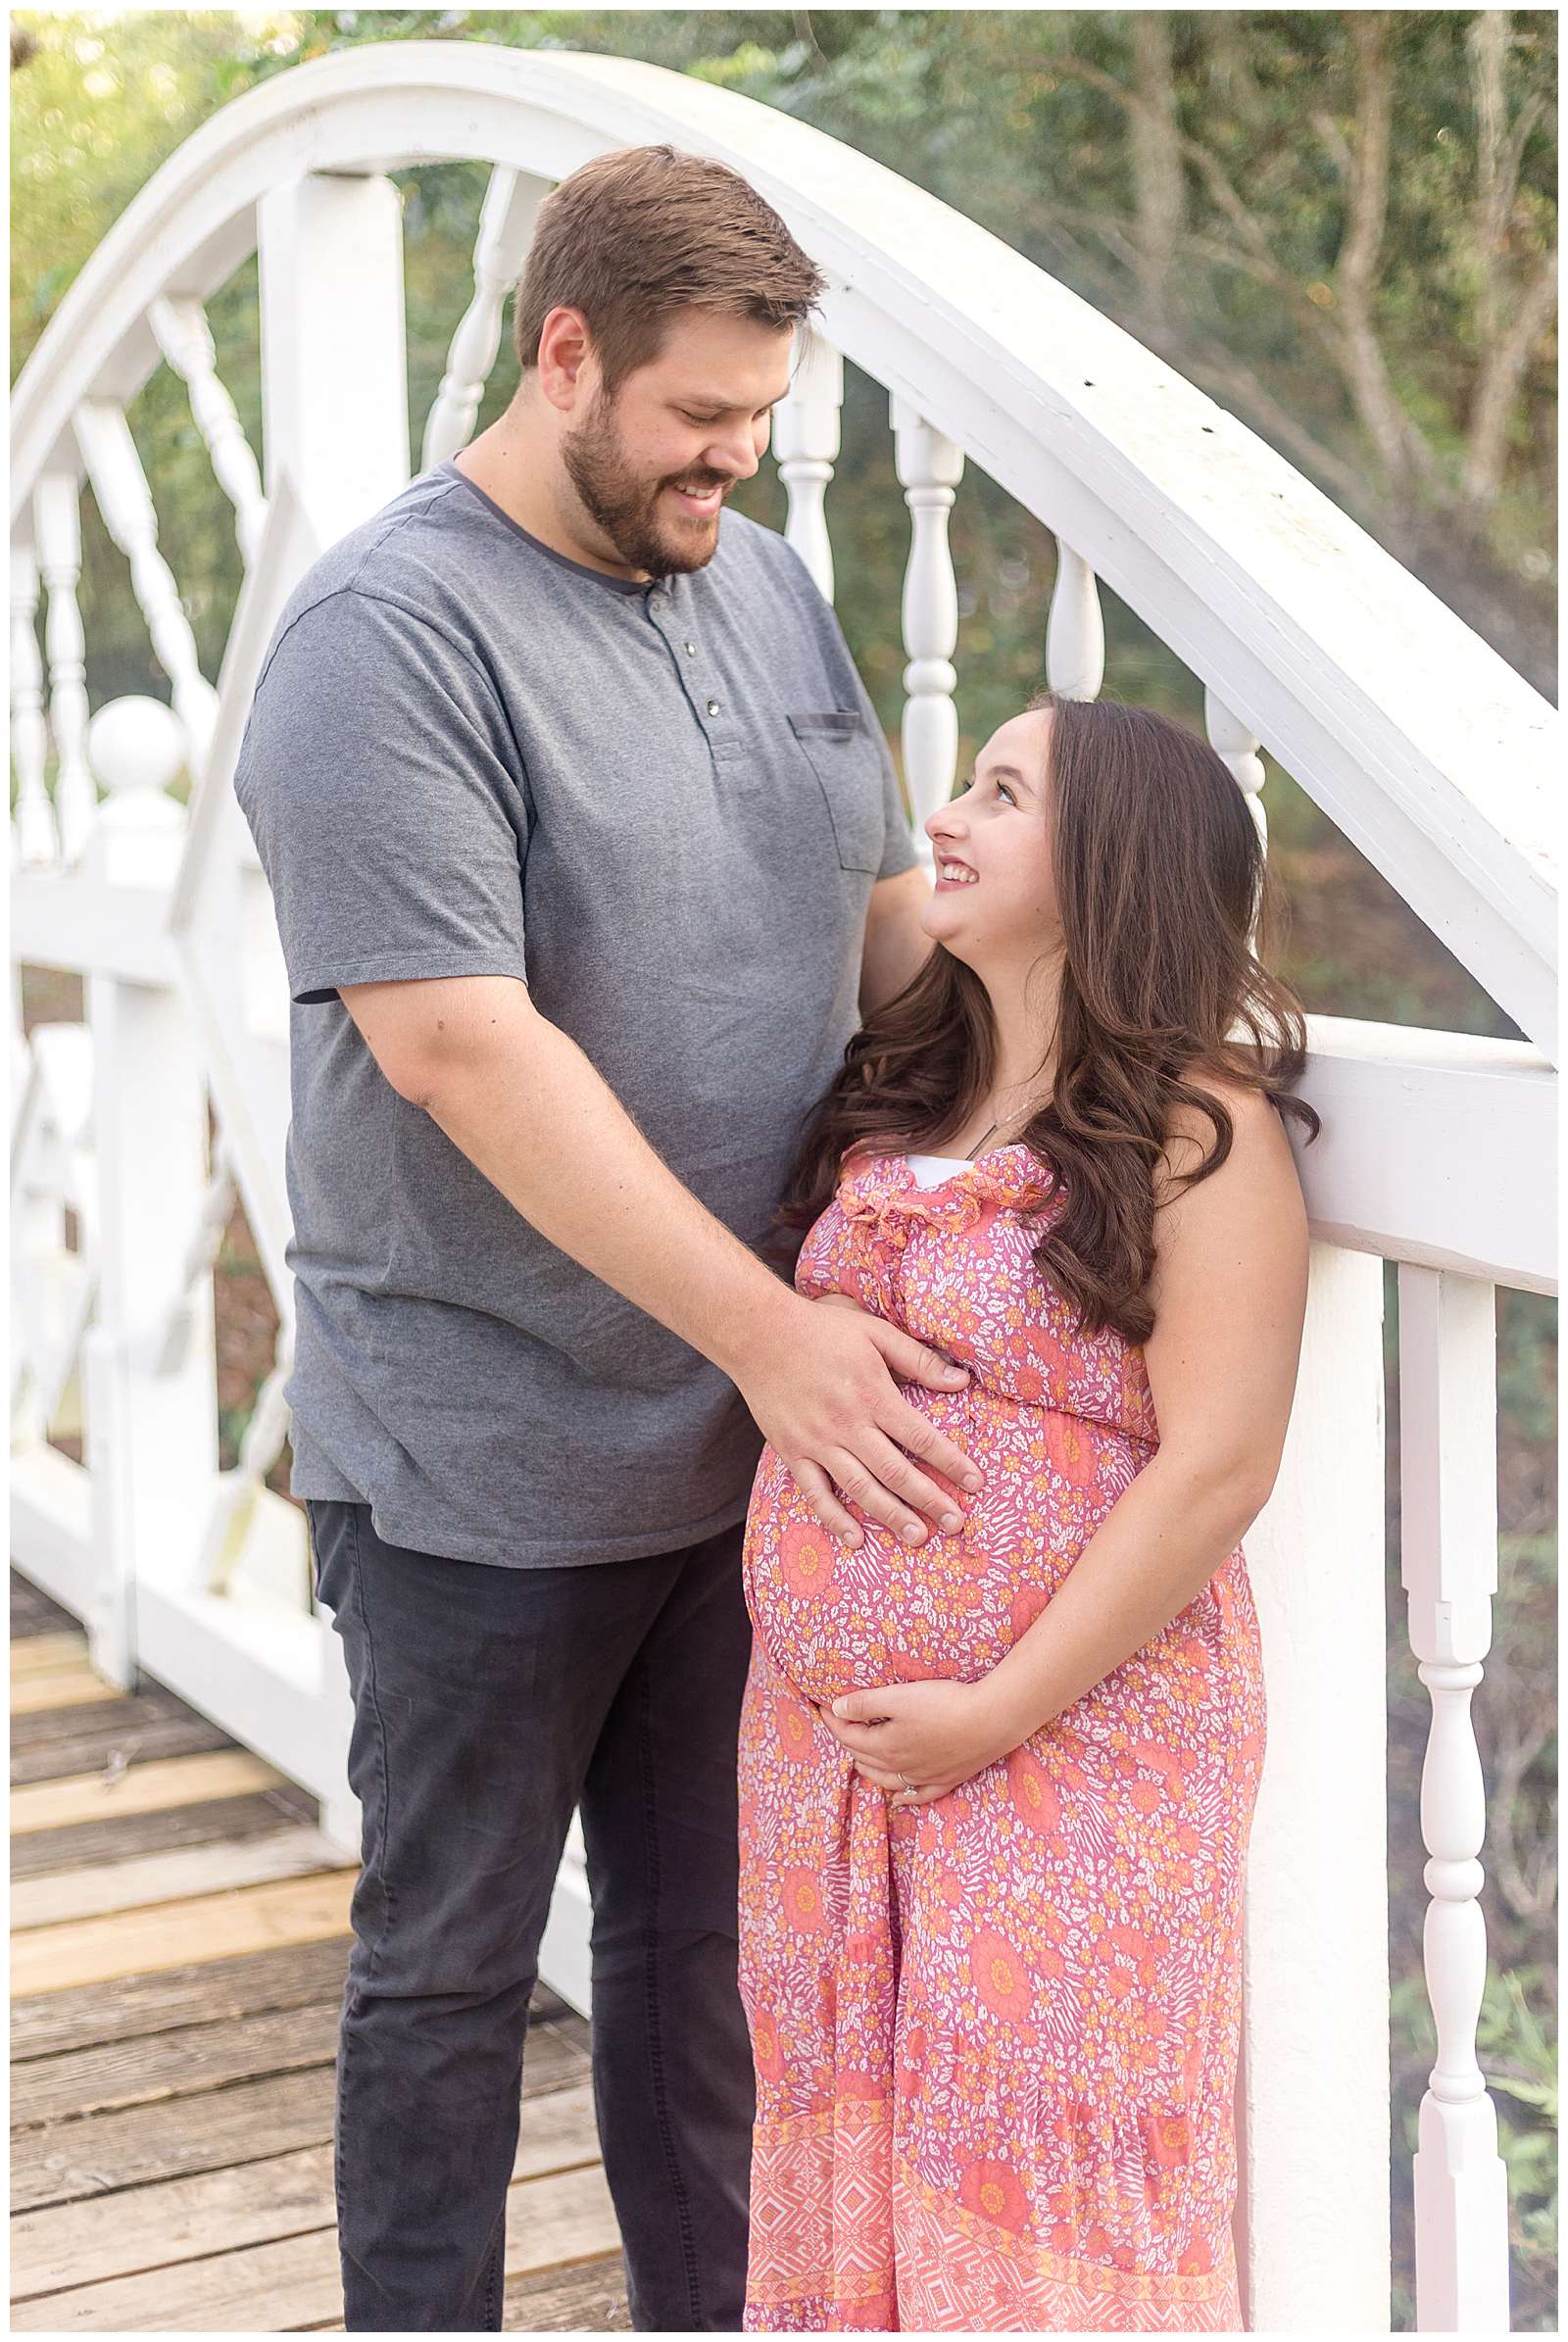 A couple with a BIG height difference stands on a bridge looking at each with smiles and anticipation for their baby on the way!  Click to see more of this height difference couple captured by Rebecca Rice Photography on the blog today!
-rebeccaricephoto.com